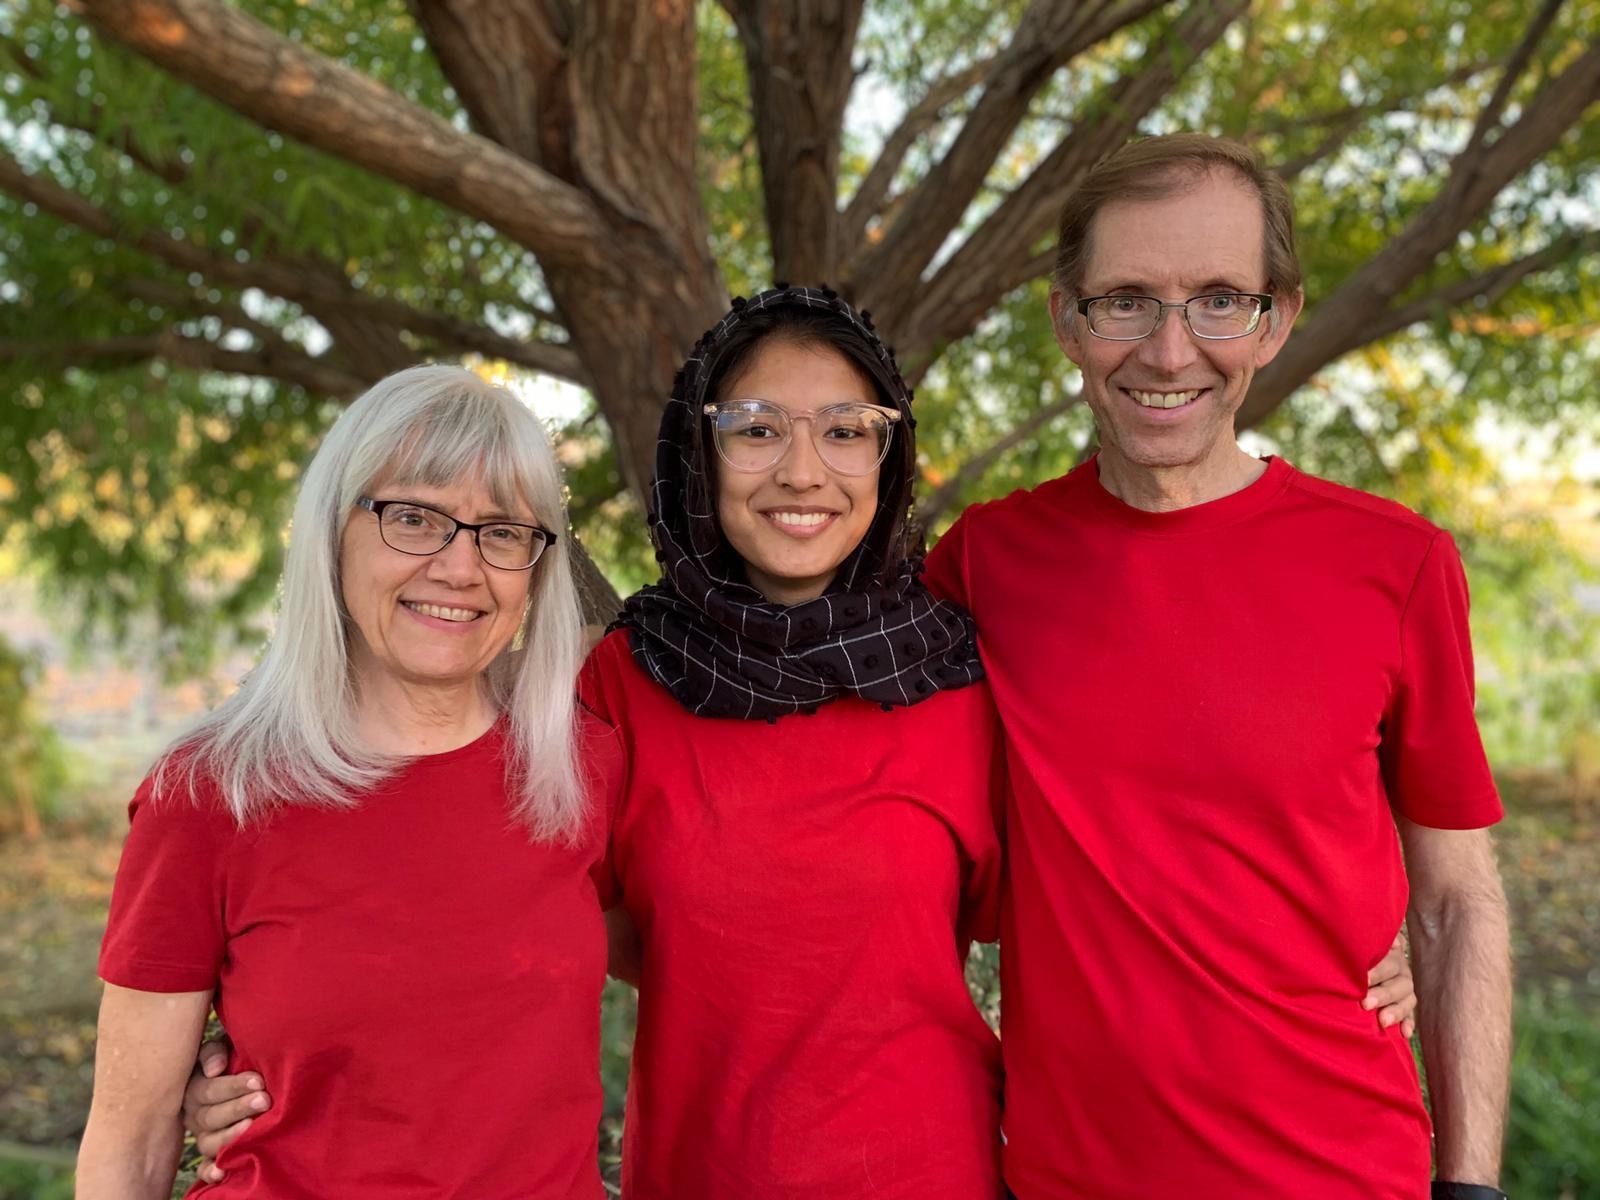 YES student and her host family wear matching red shirts